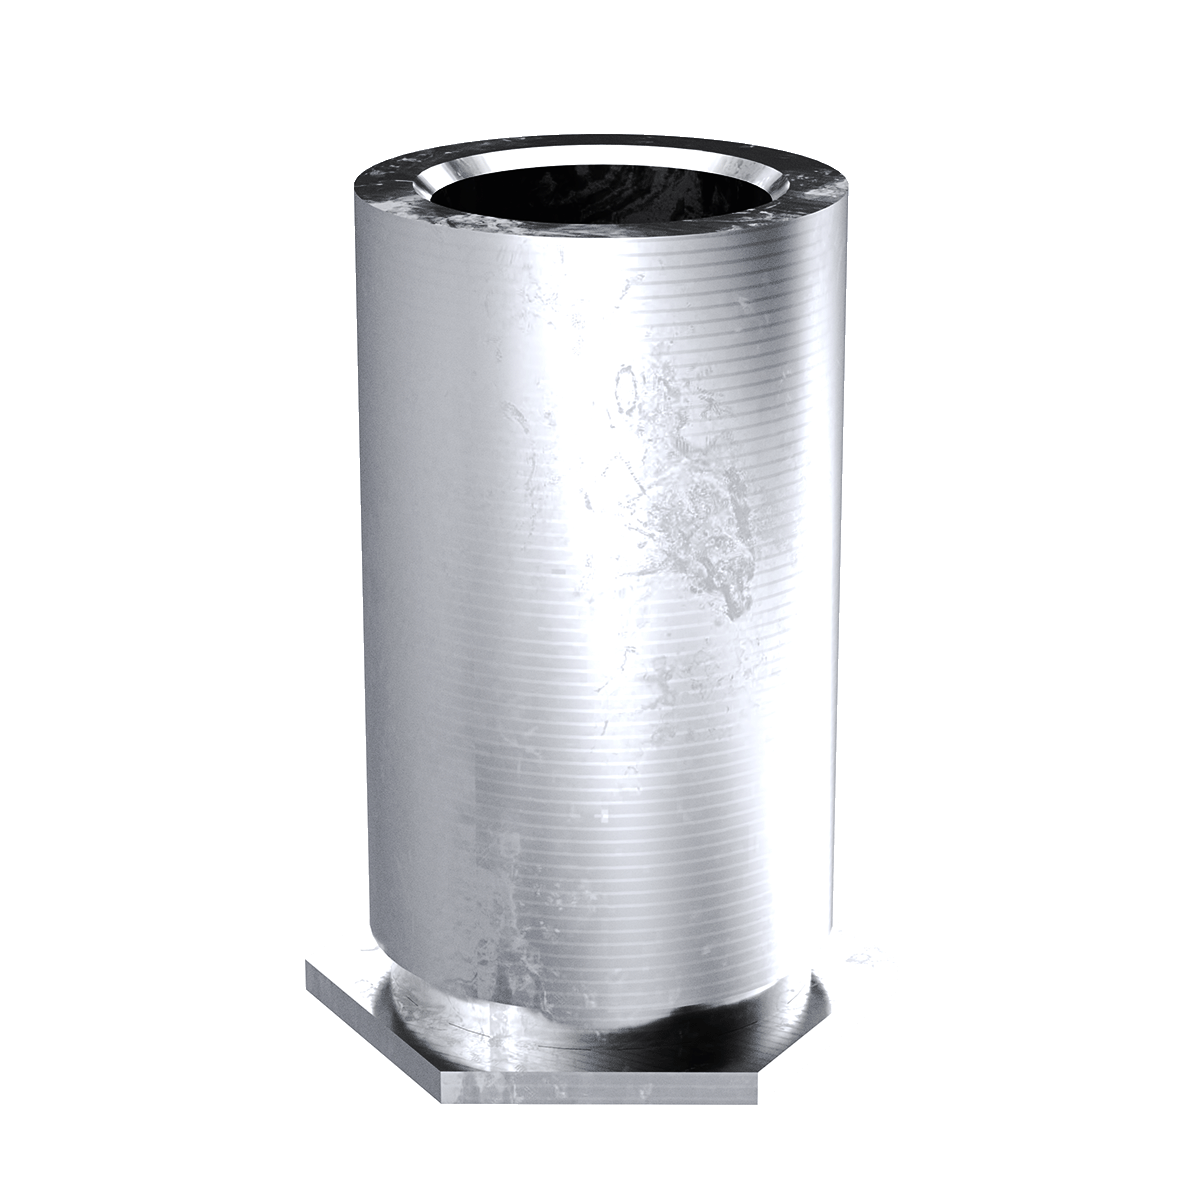 Self-Clinching Standoff, Through Unthreaded, 300 Series Stainless Steel, Passivated, 5.1 x 8, 100 Pack